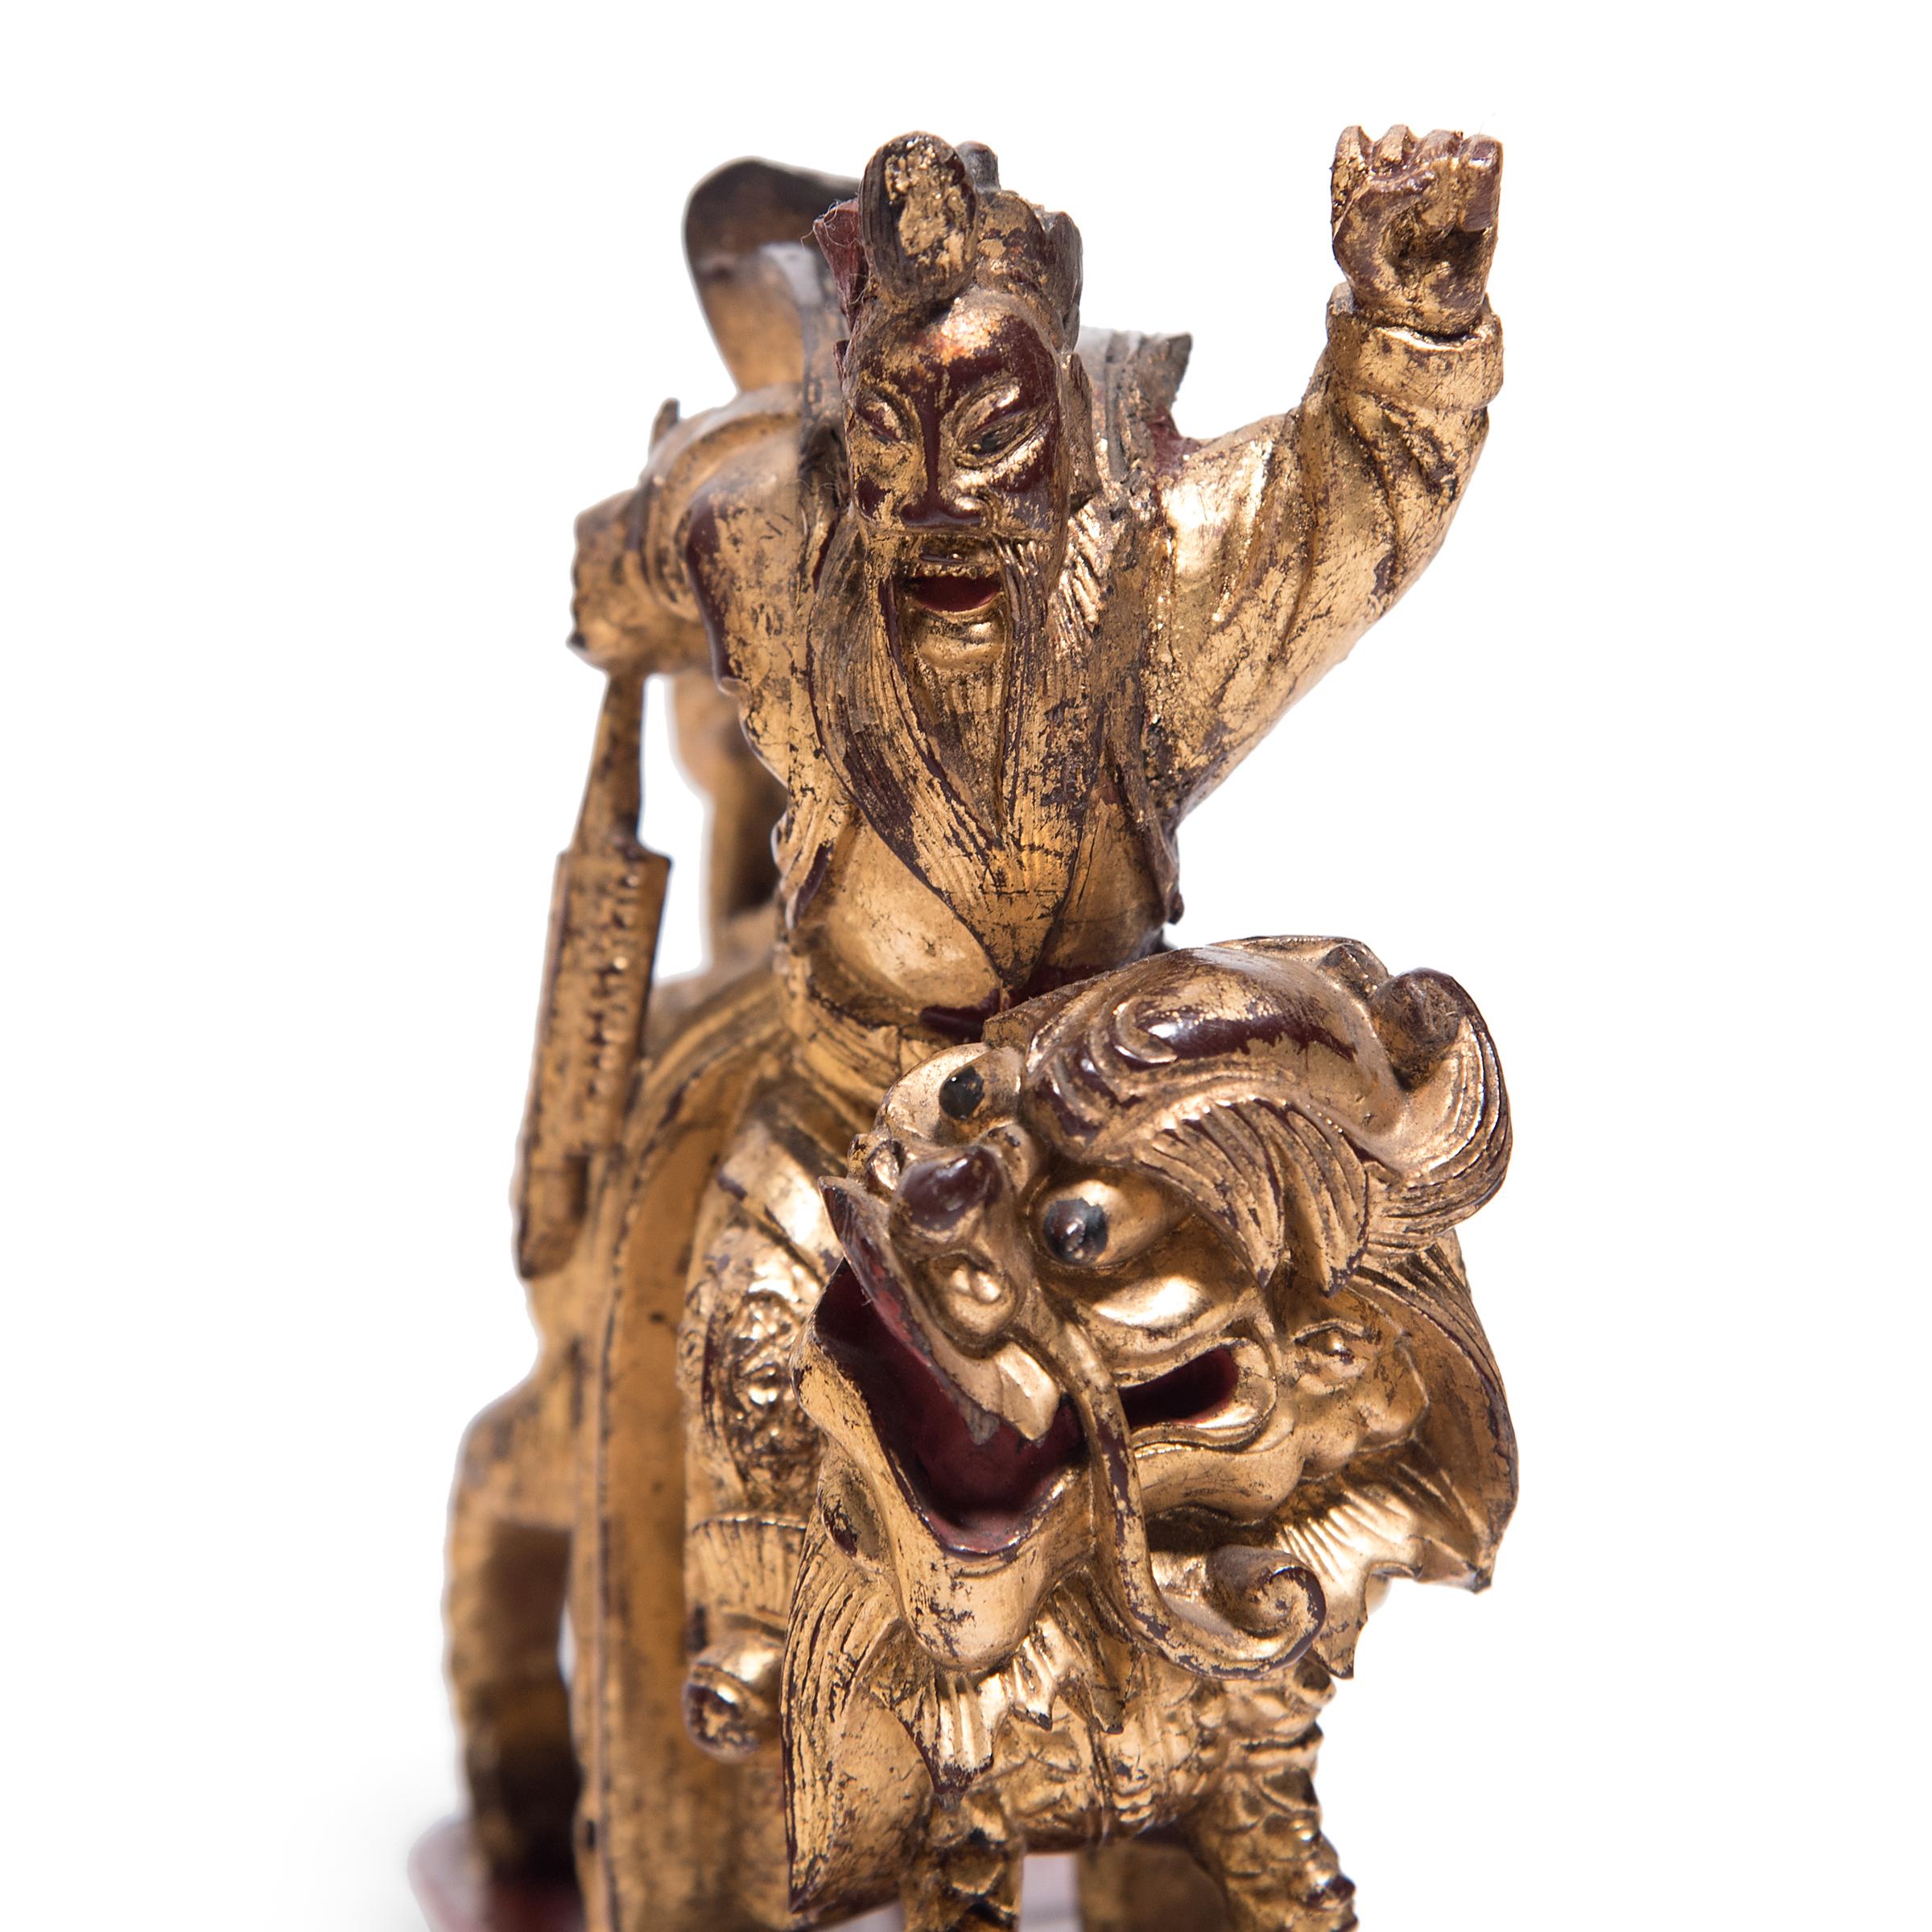 Qing Chinese Mythical Gilt Figure with Divine Steed, circa 1850